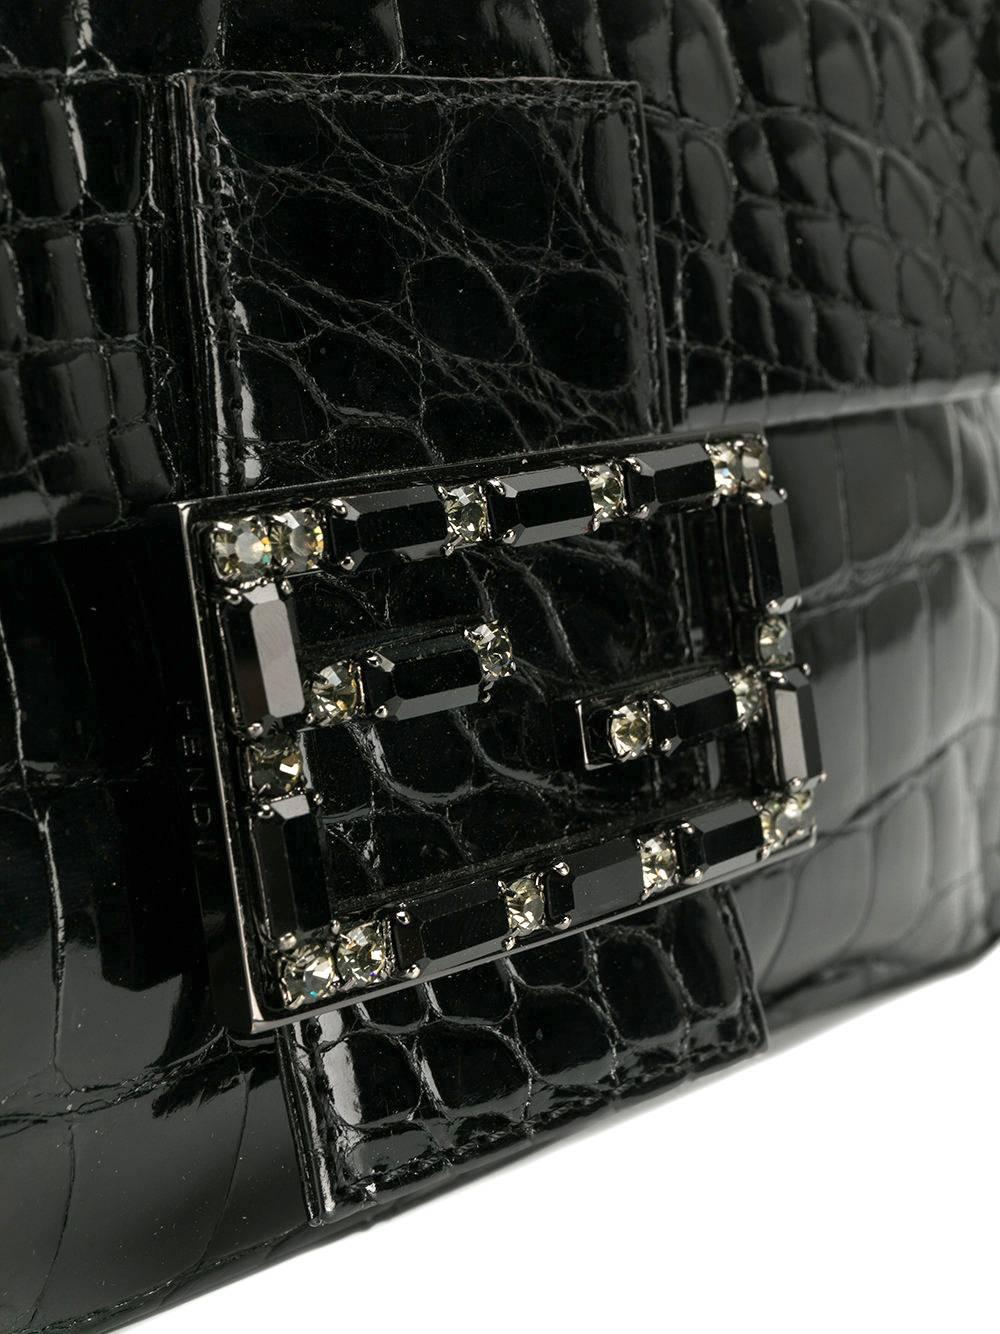 Elegant Fendi black crocodile leather baguette bag. If features a magnetic button closure, embellished with rhinestone double-logo plaque. The bag comes with its original dustbag. The item is vintage, it was produced in the 2000s and is in excellent